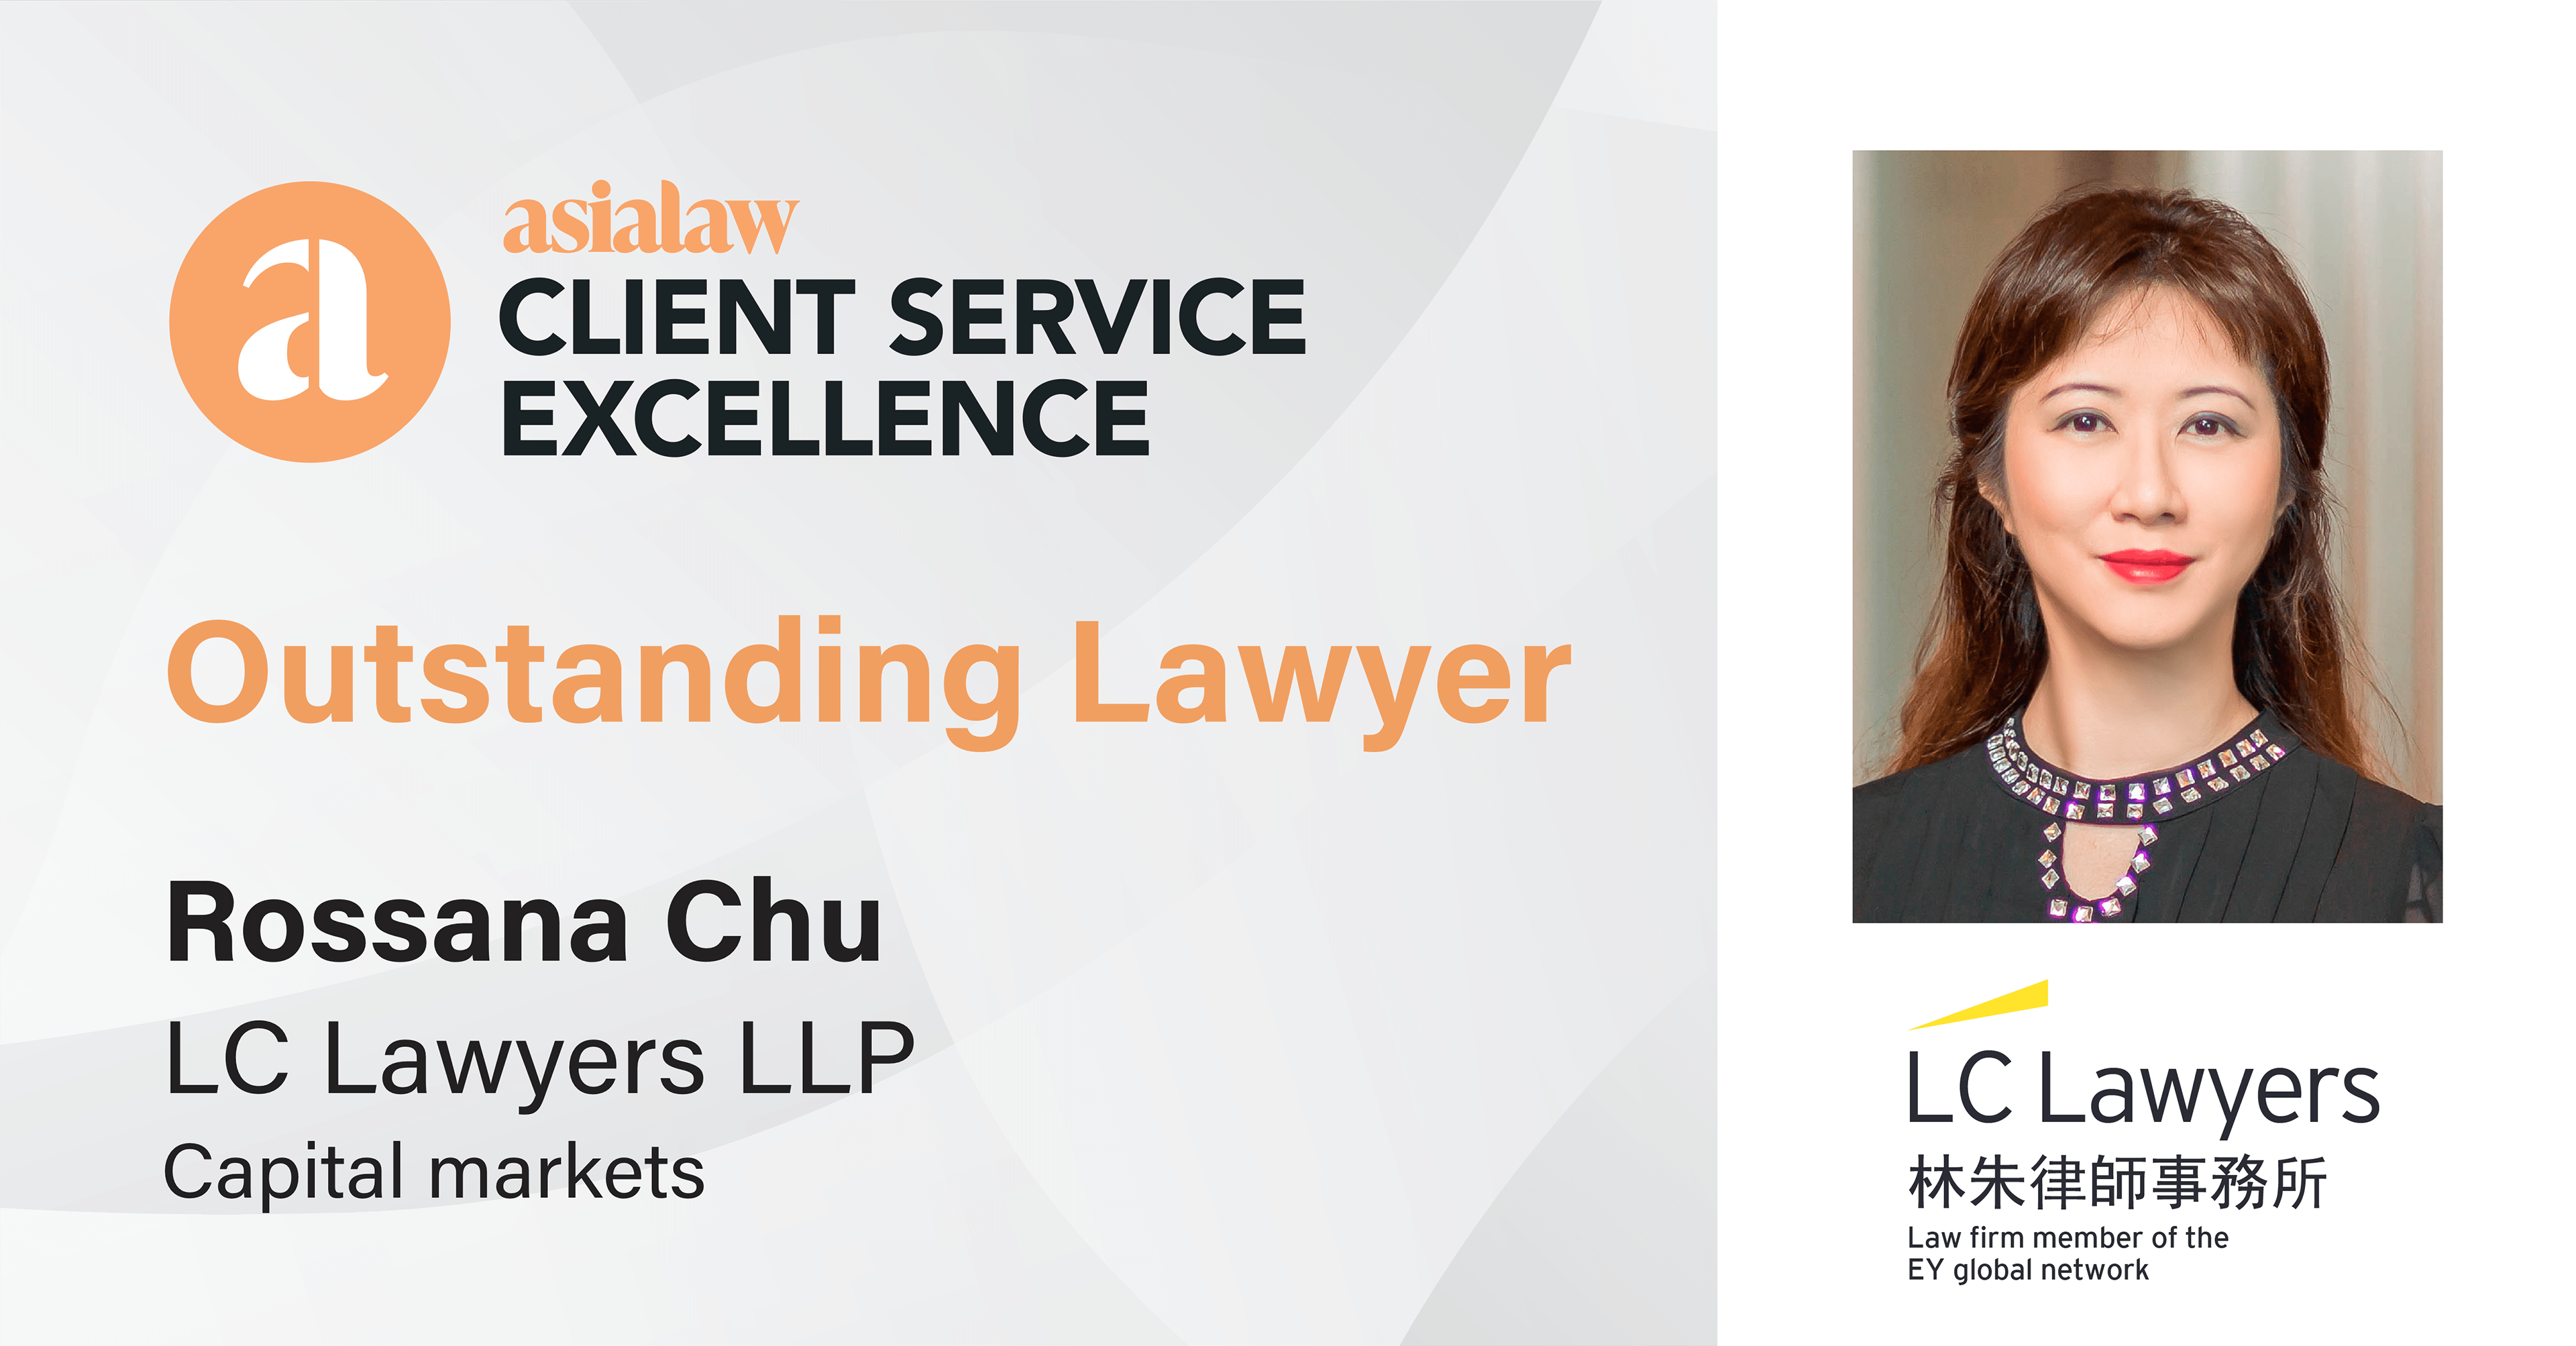 Outstanding Lawyer by asialaw Client Service Excellence 2021